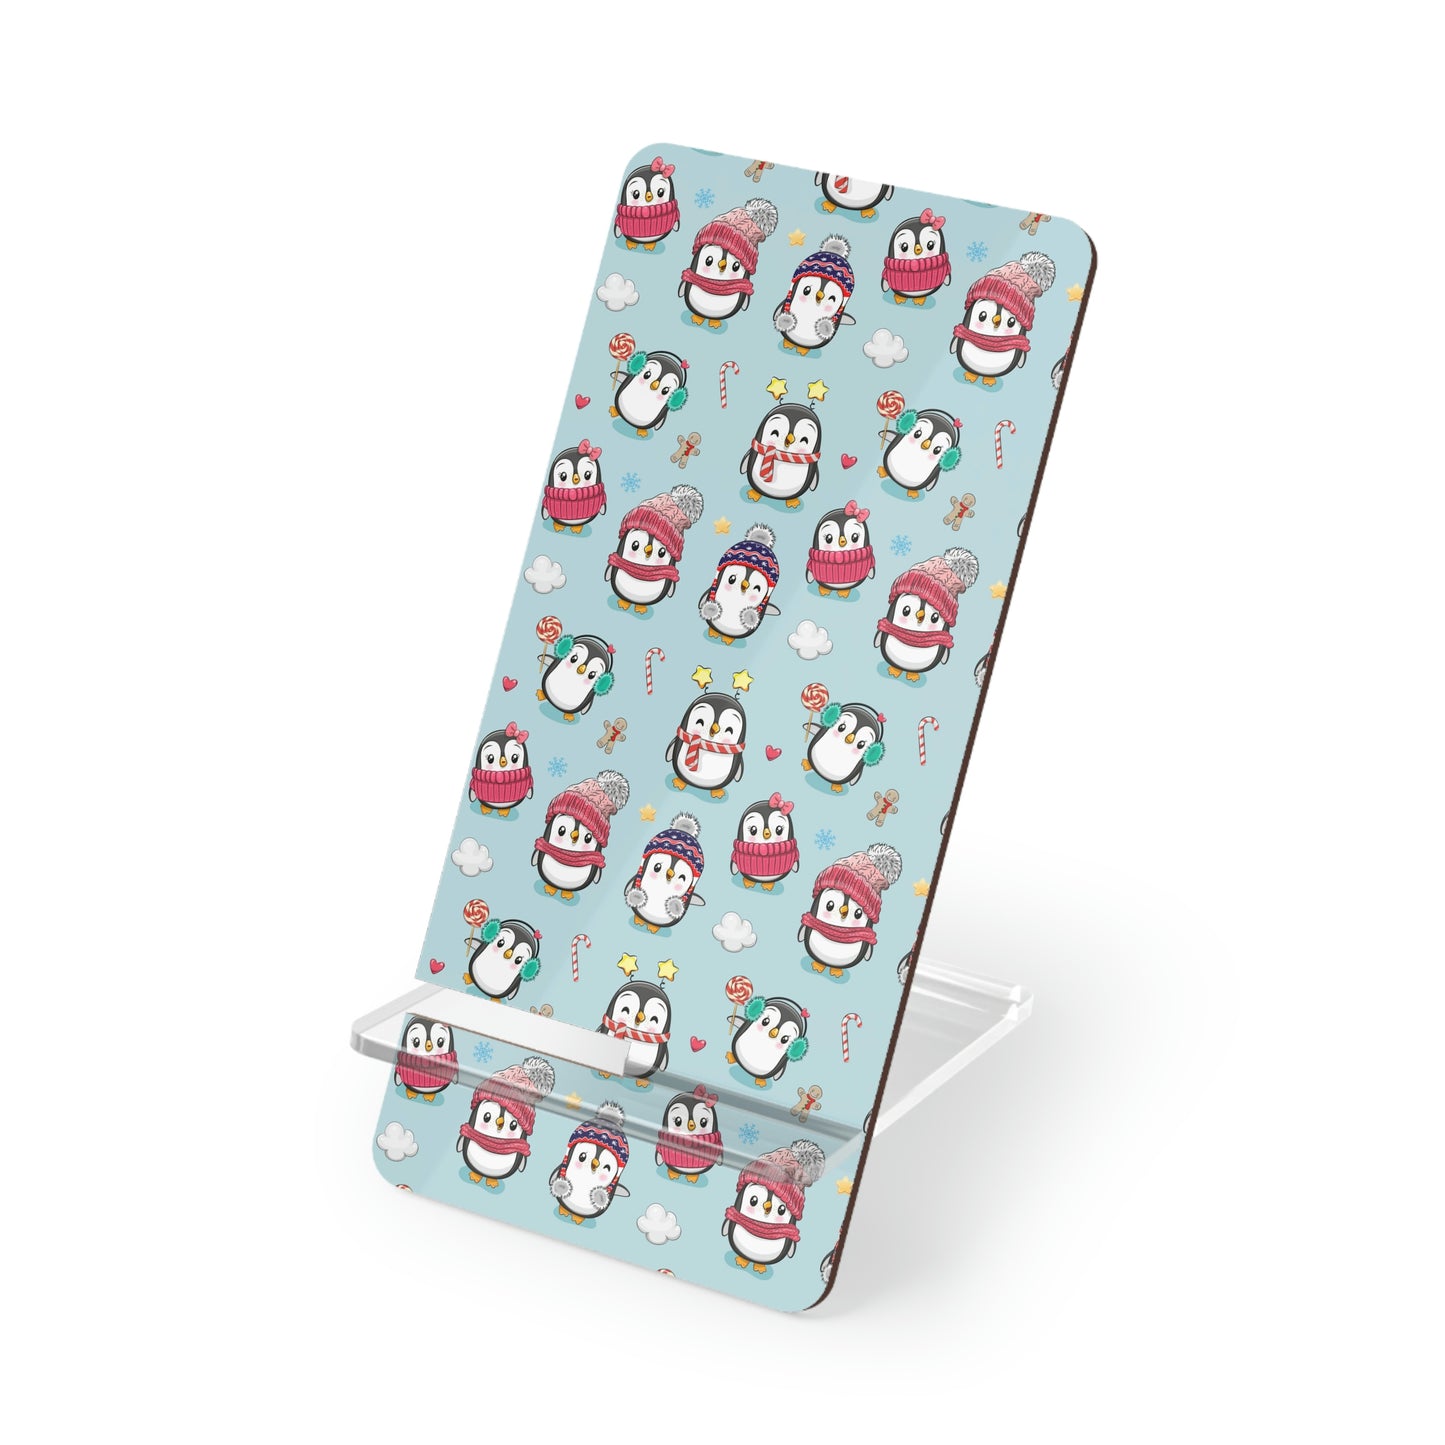 Penguins in Winter Clothes Mobile Display Stand for Smartphones